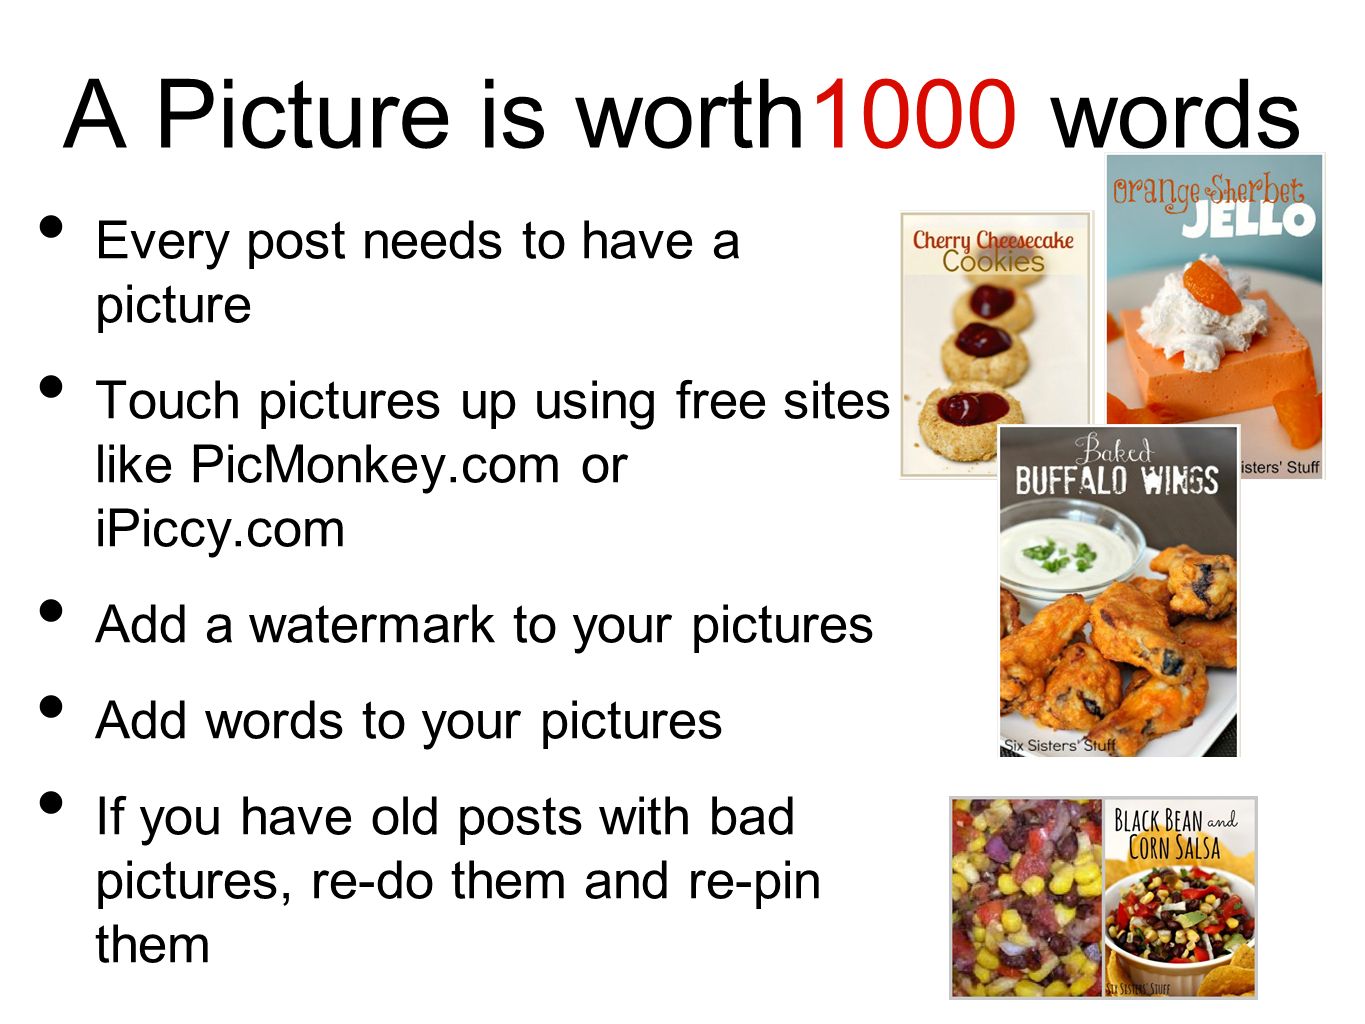 A Picture is worth1000 words Every post needs to have a picture Touch pictures up using free sites like PicMonkey.com or iPiccy.com Add a watermark to your pictures Add words to your pictures If you have old posts with bad pictures, re-do them and re-pin them